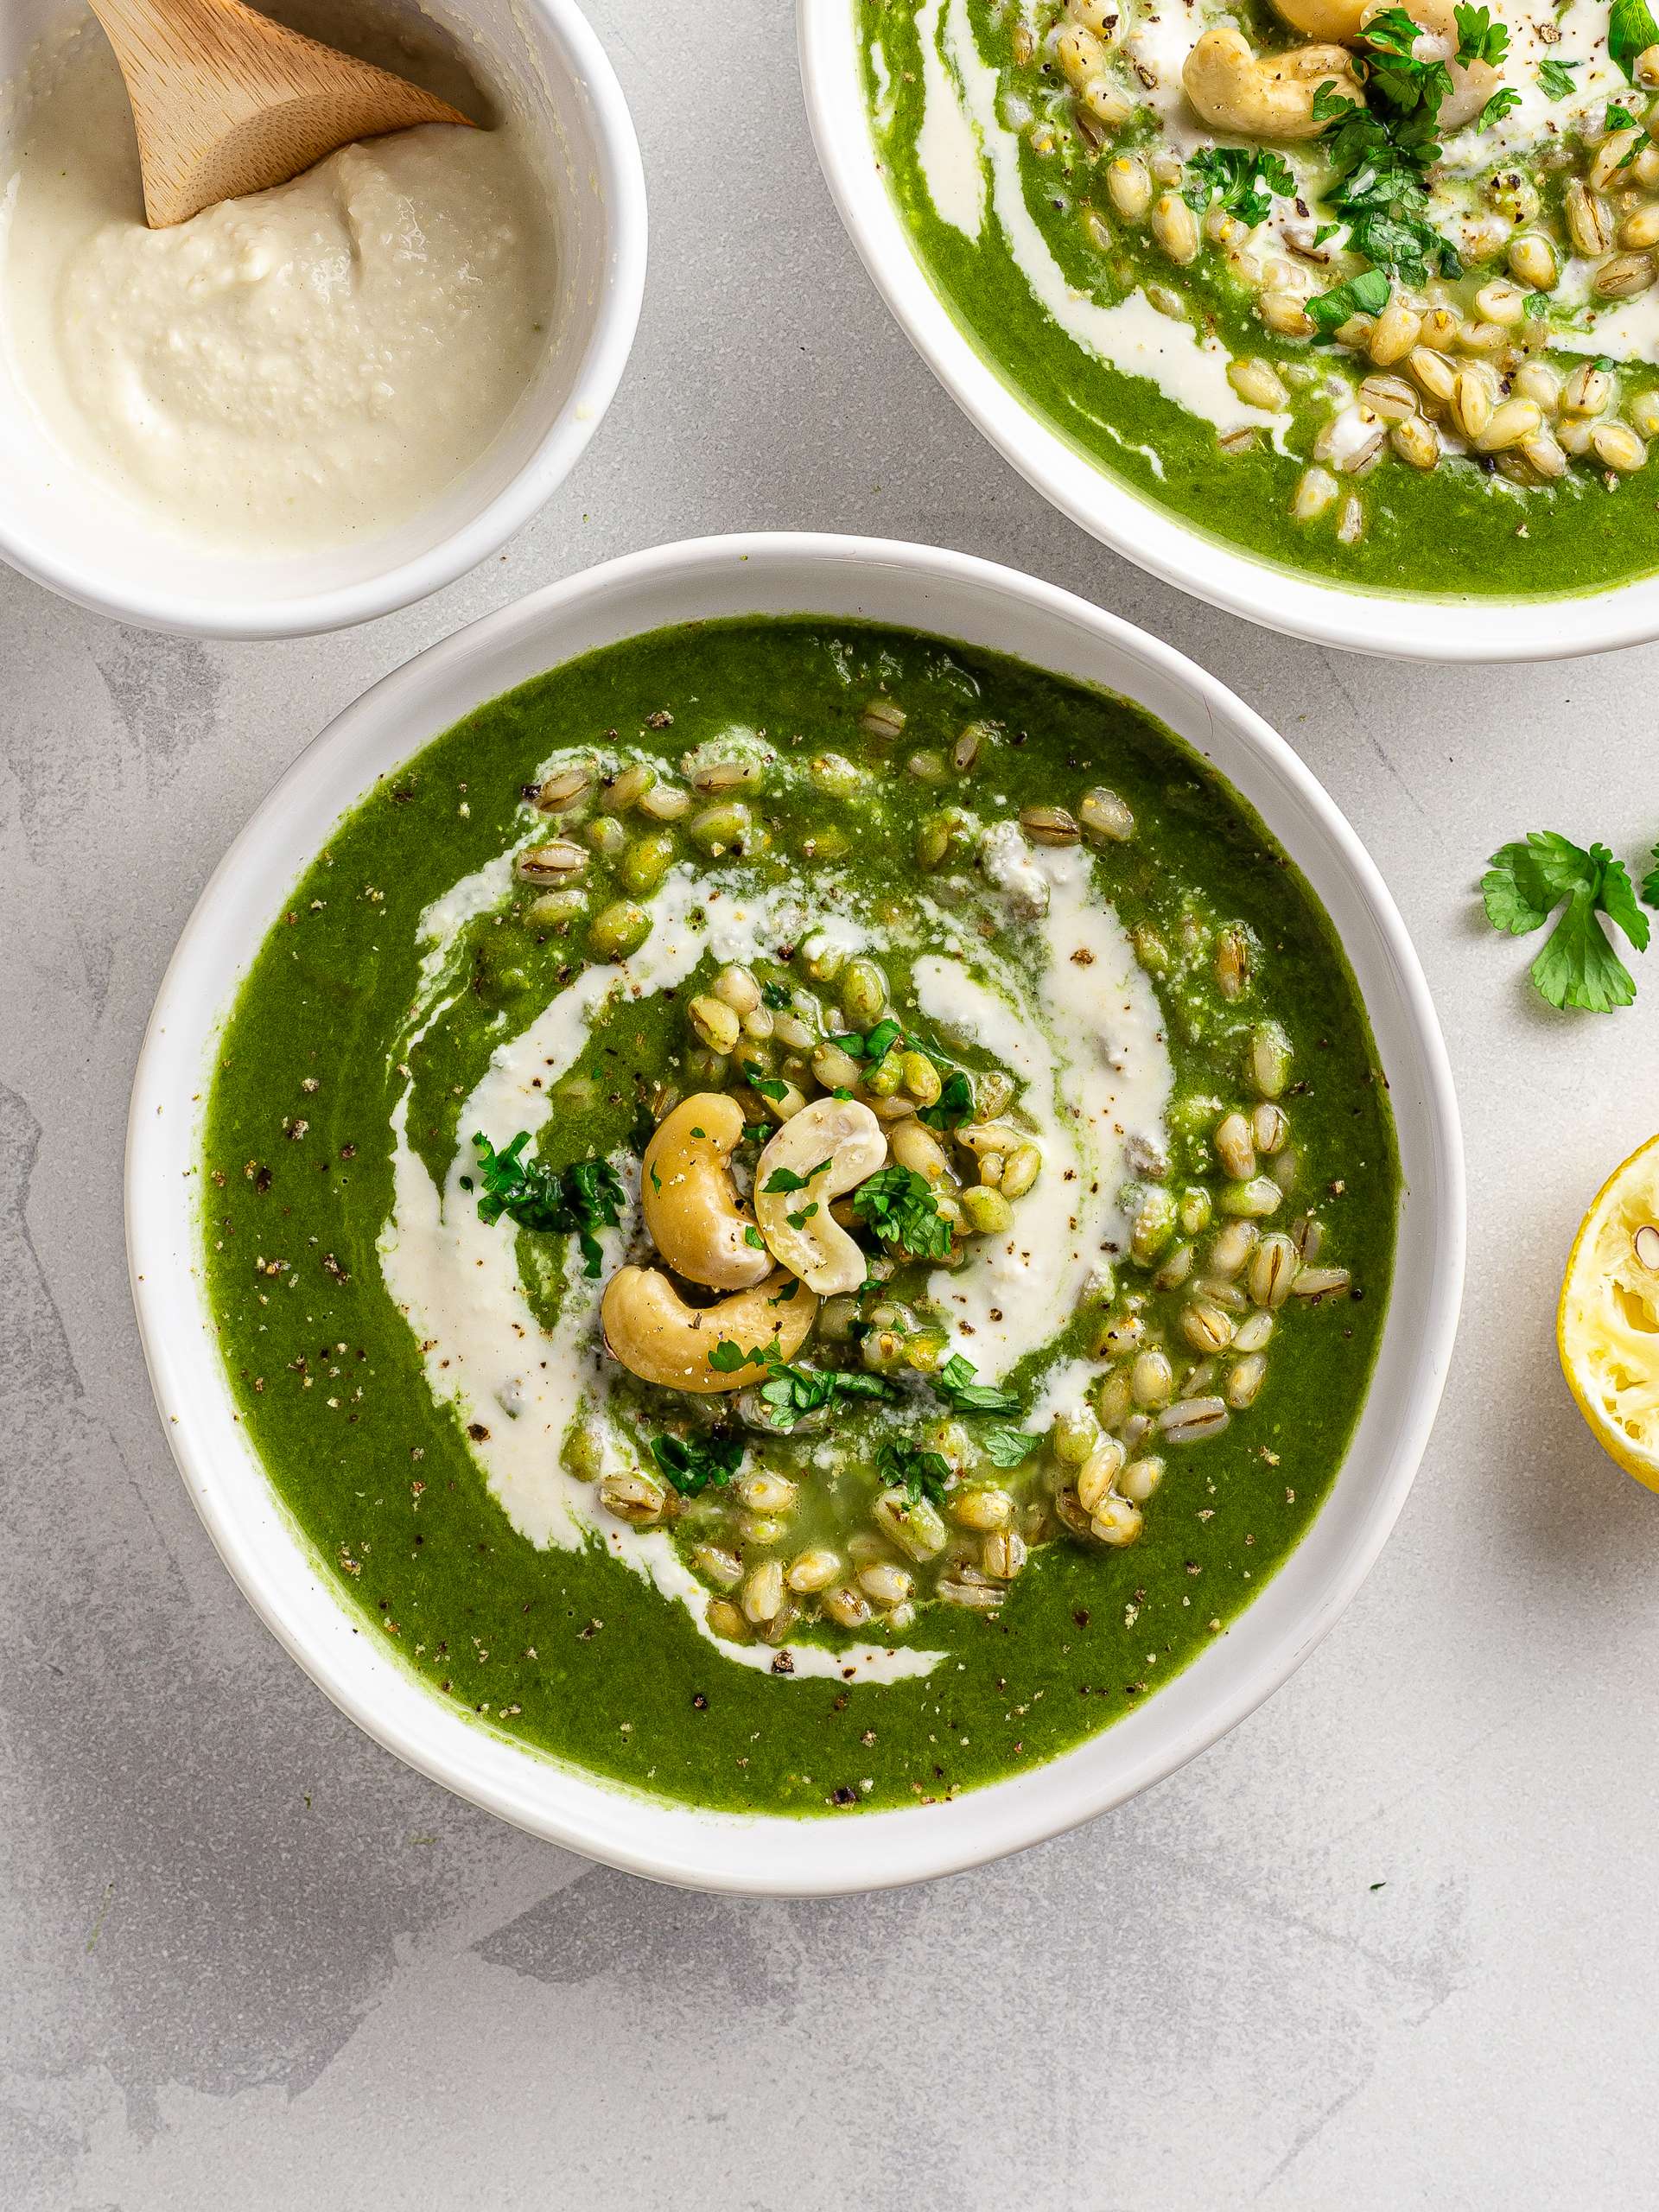 Spinach soup with barley and vegan crème fraîche